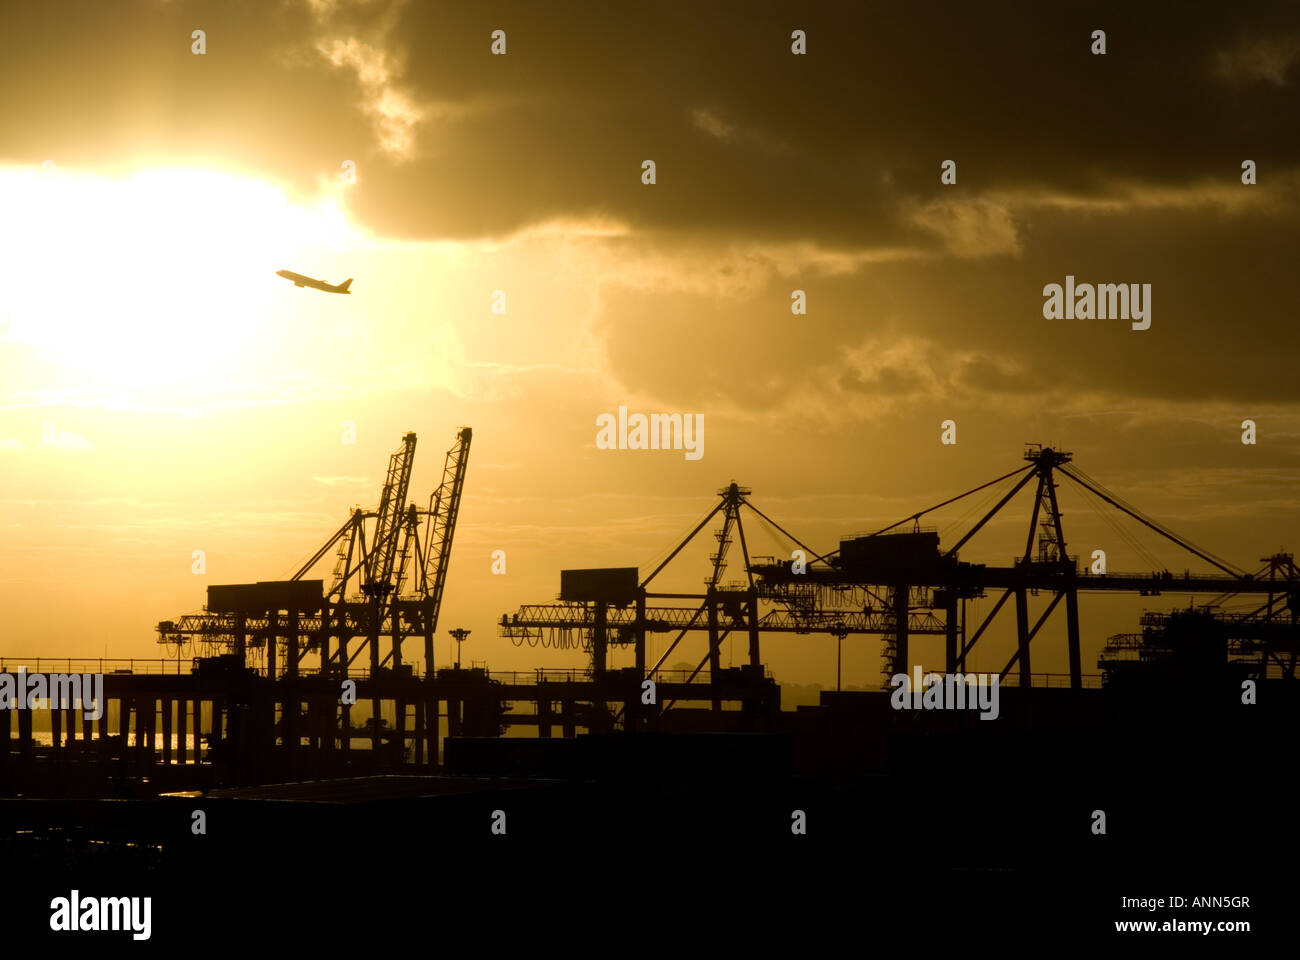 Cranes at Port Botany in Sydney at Sunset as a plane flies across the sun Stock Photo